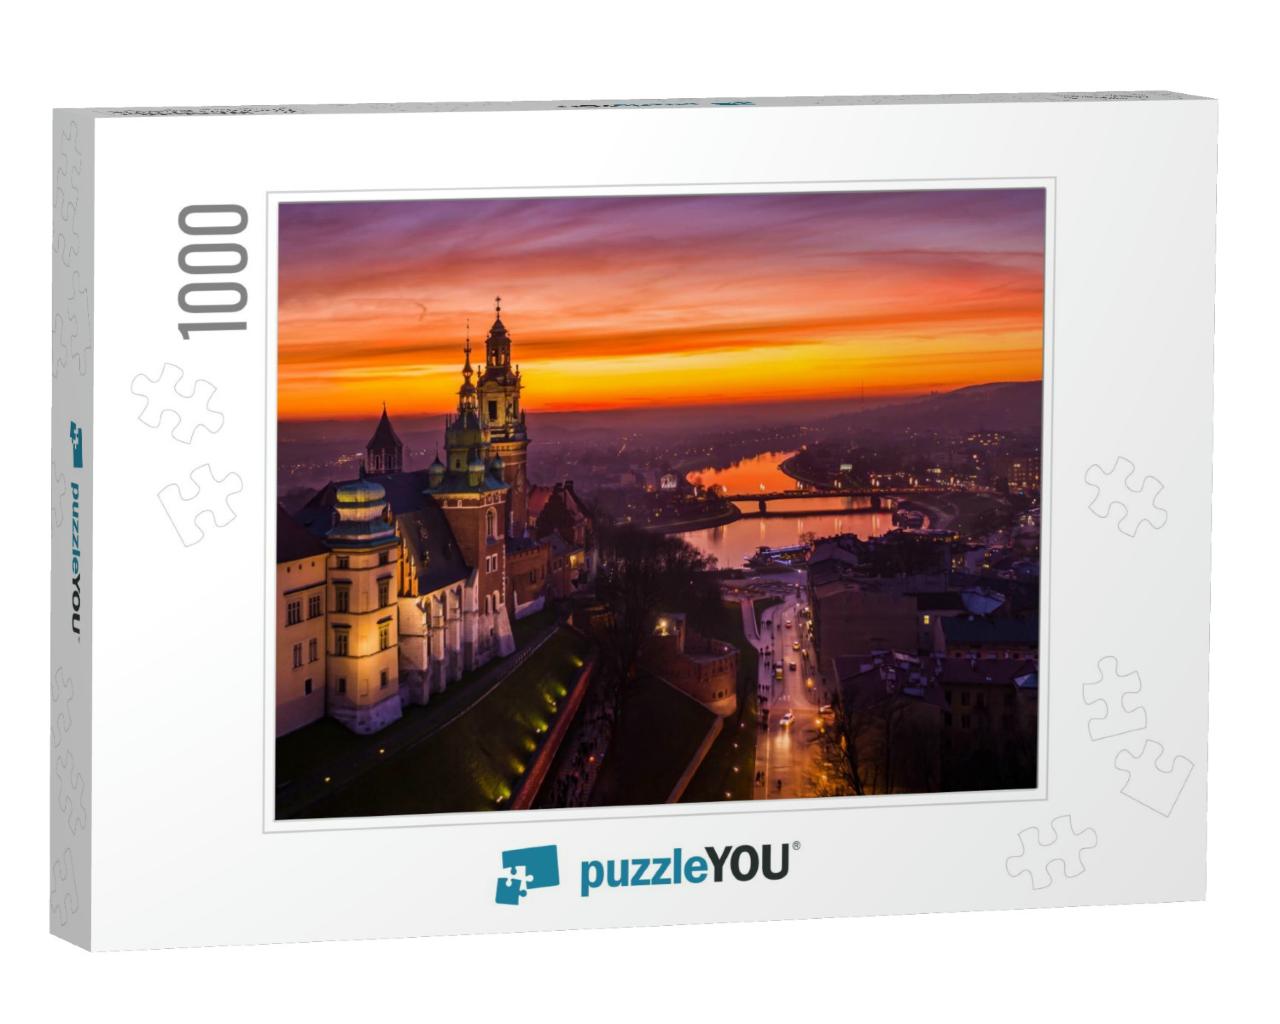 Sunset Over Wawel Castle, Cracow, Poland... Jigsaw Puzzle with 1000 pieces